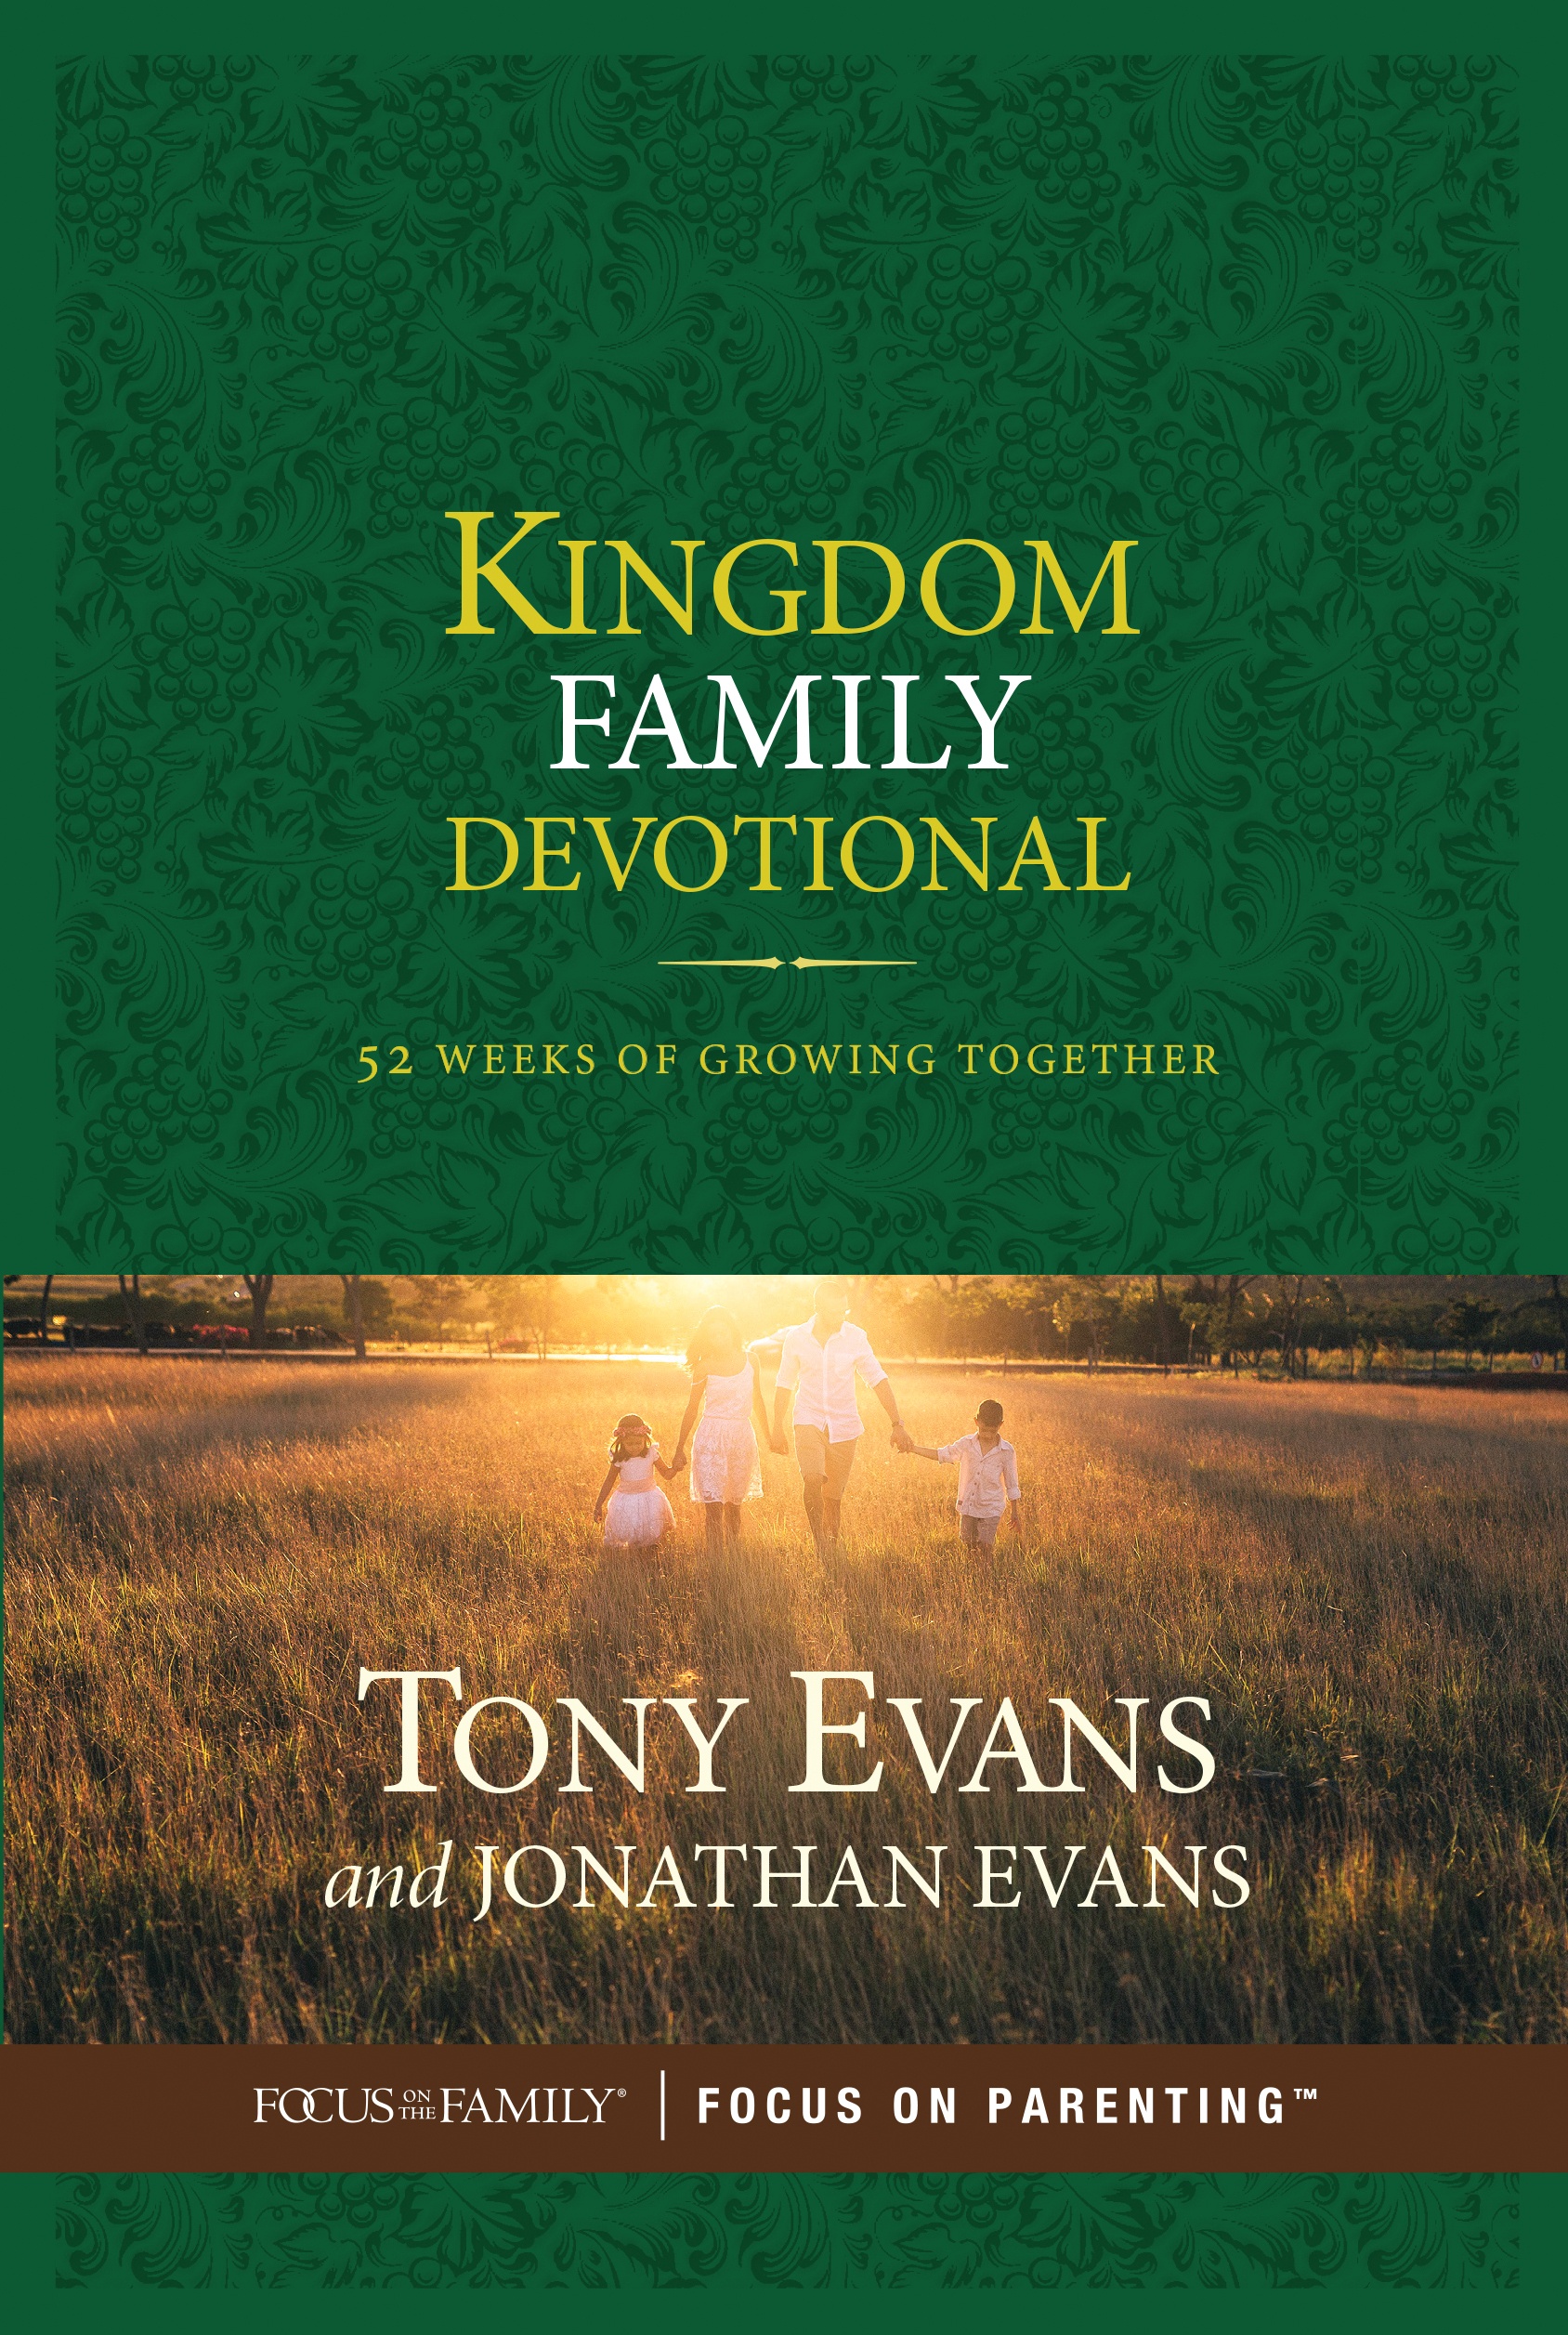 Kingdom Family Devotional by Dr. Tony Evans and Jonathan Evans